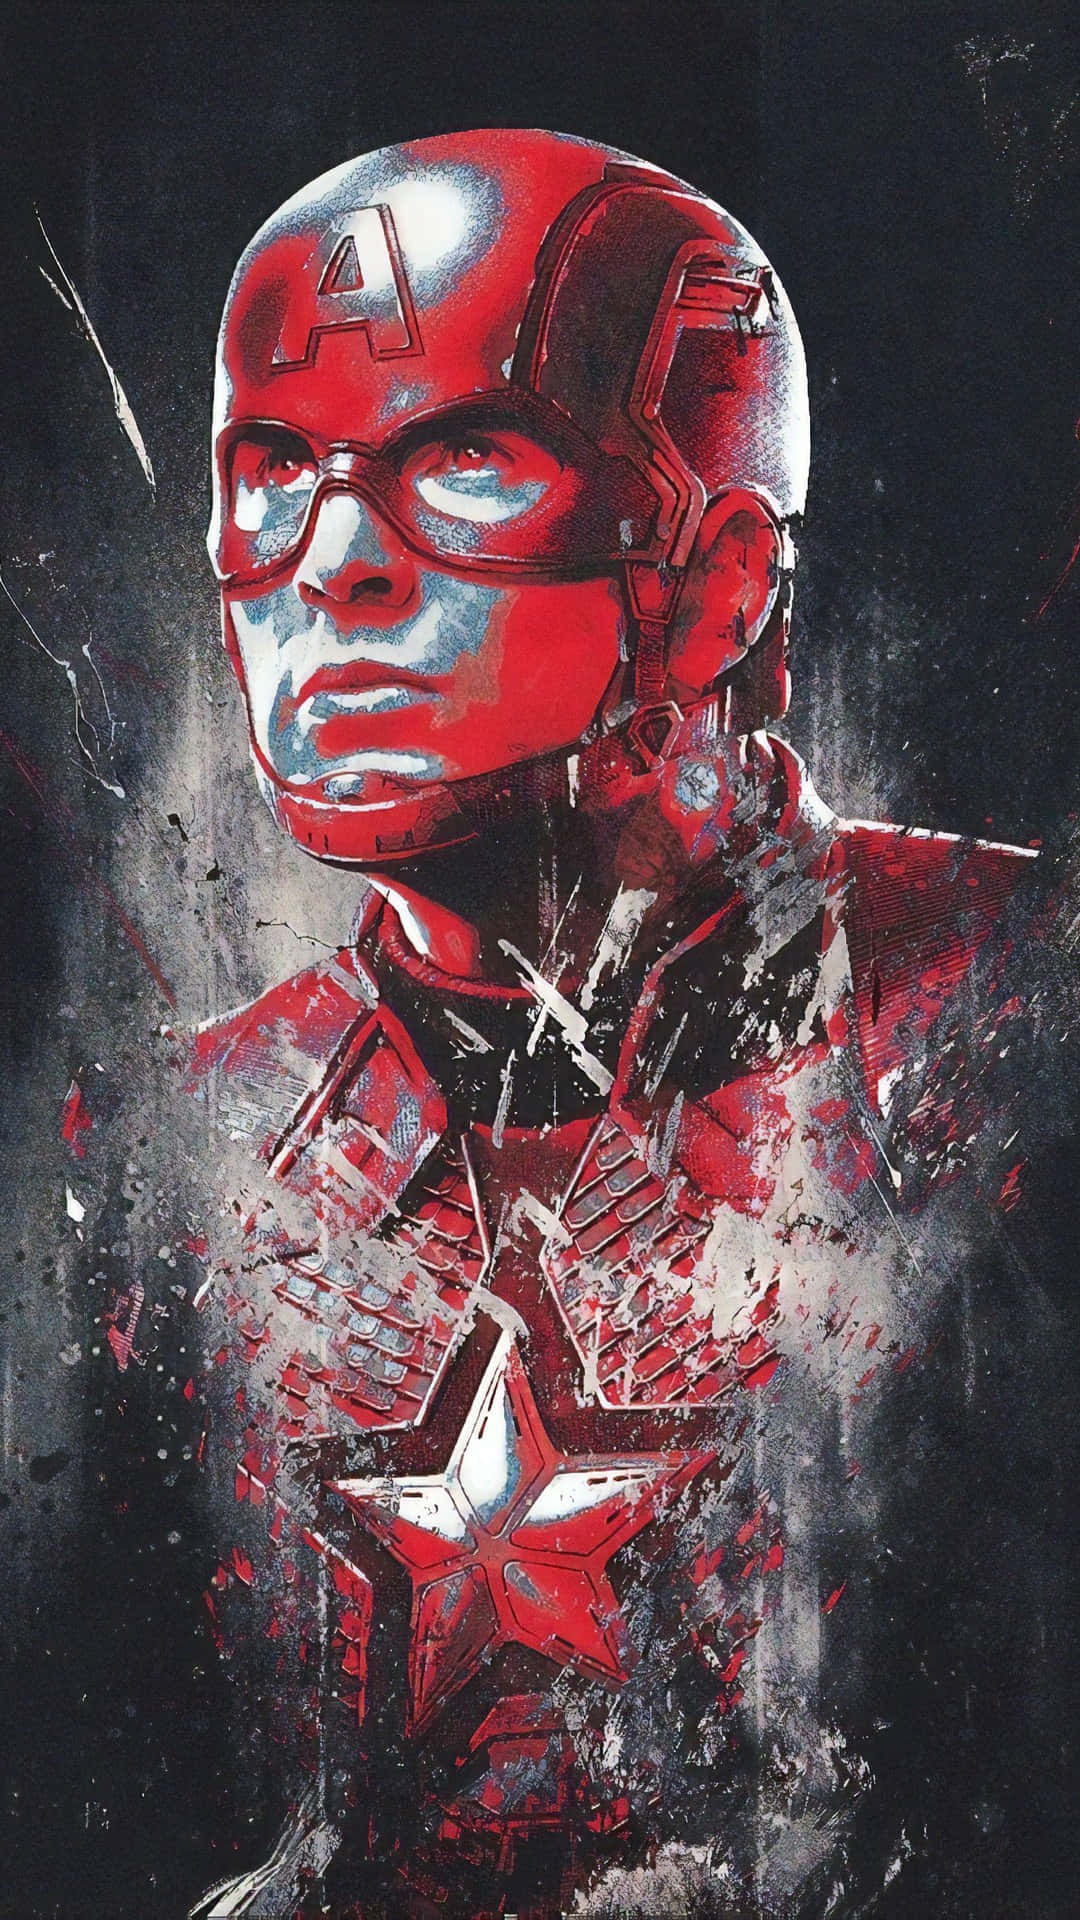 Gear up for Avengers Endgame with this special release iPhone Wallpaper